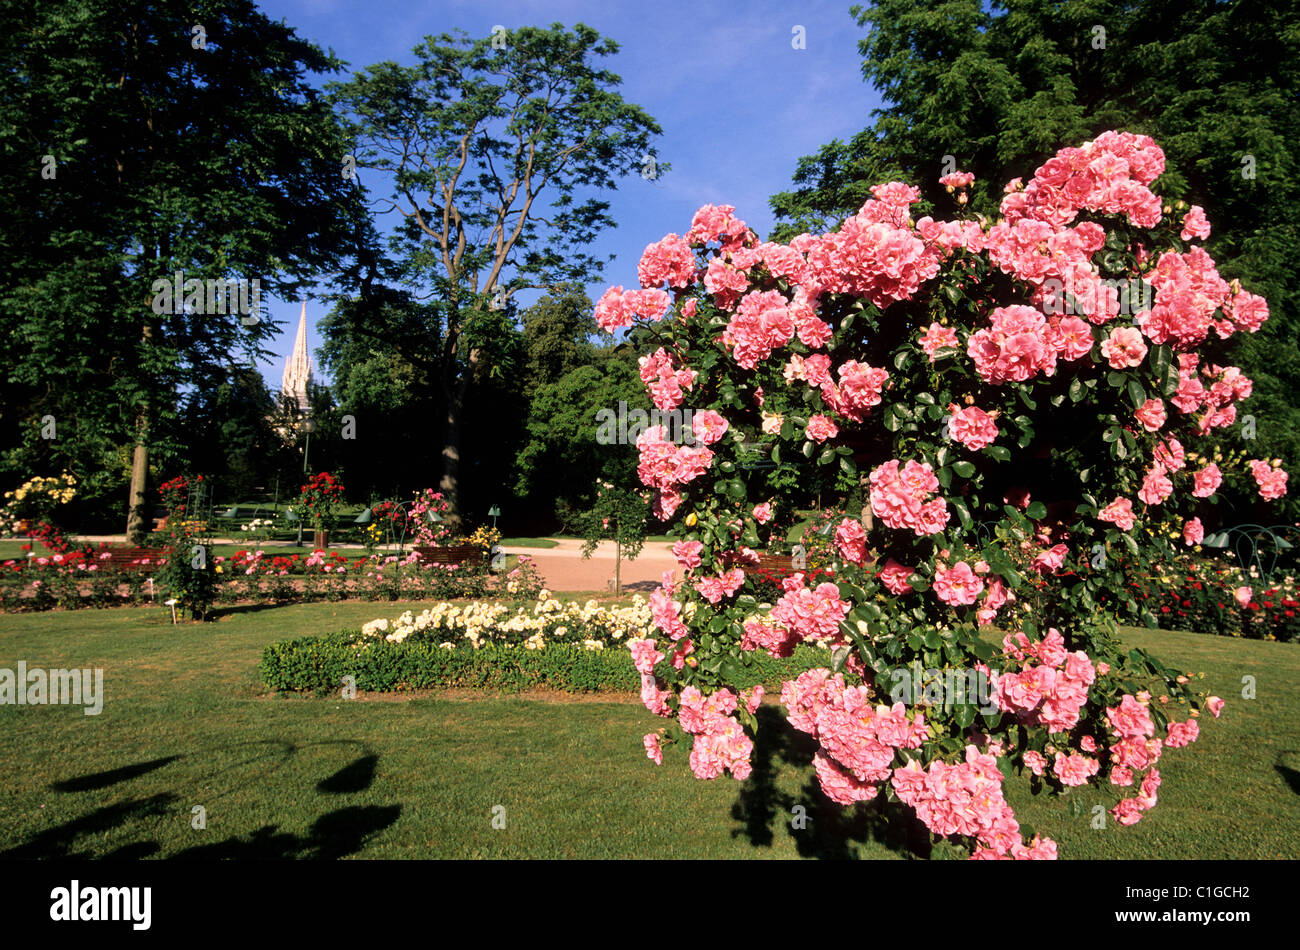 France, Meurthe et Moselle, Nancy, the rose garden of the Pepiniere park Stock Photo